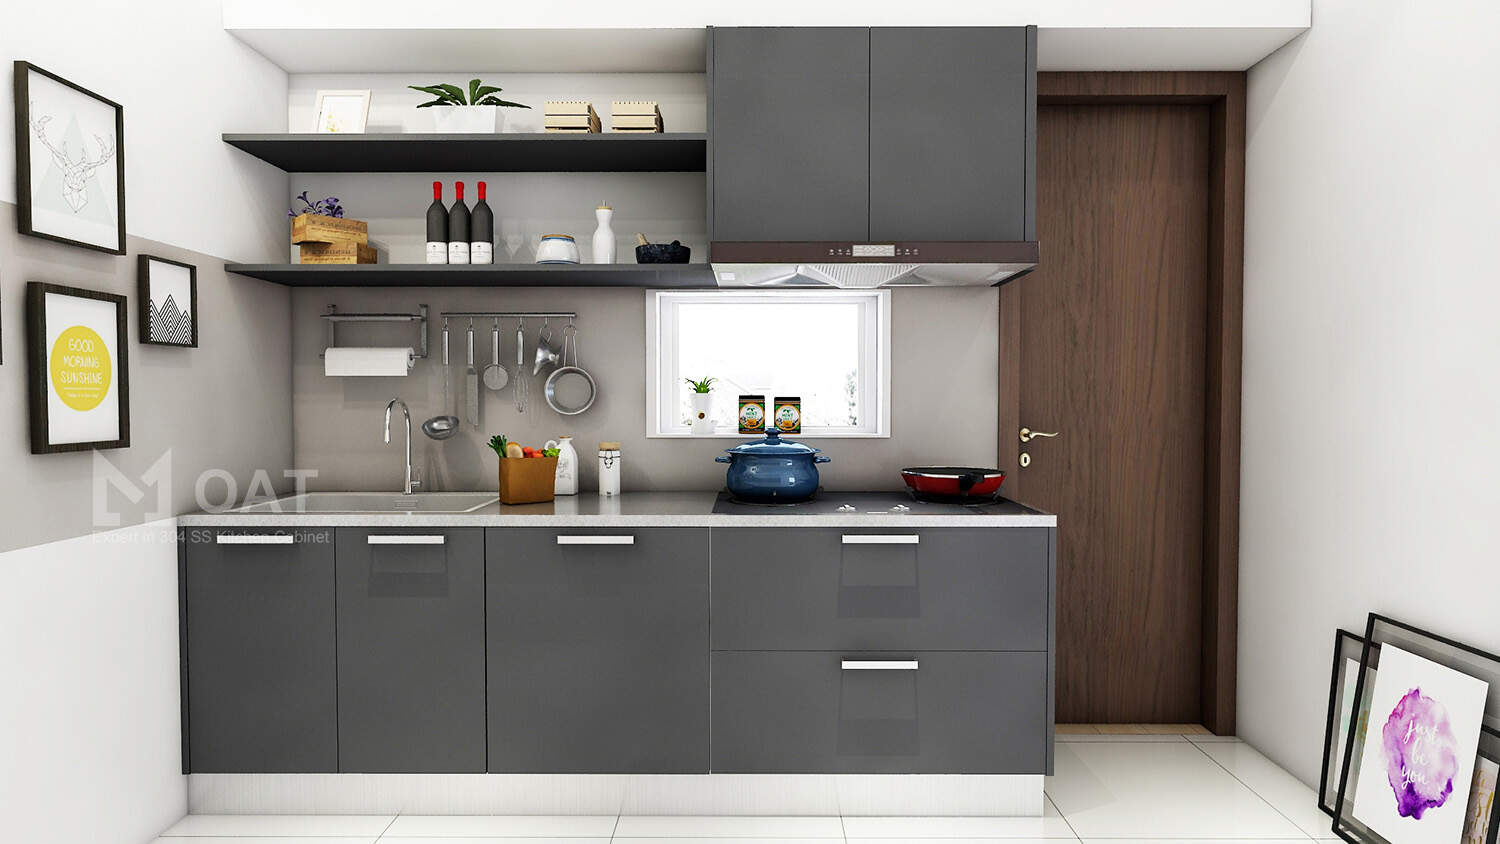 Is stainless steel good for kitchen cabinets?